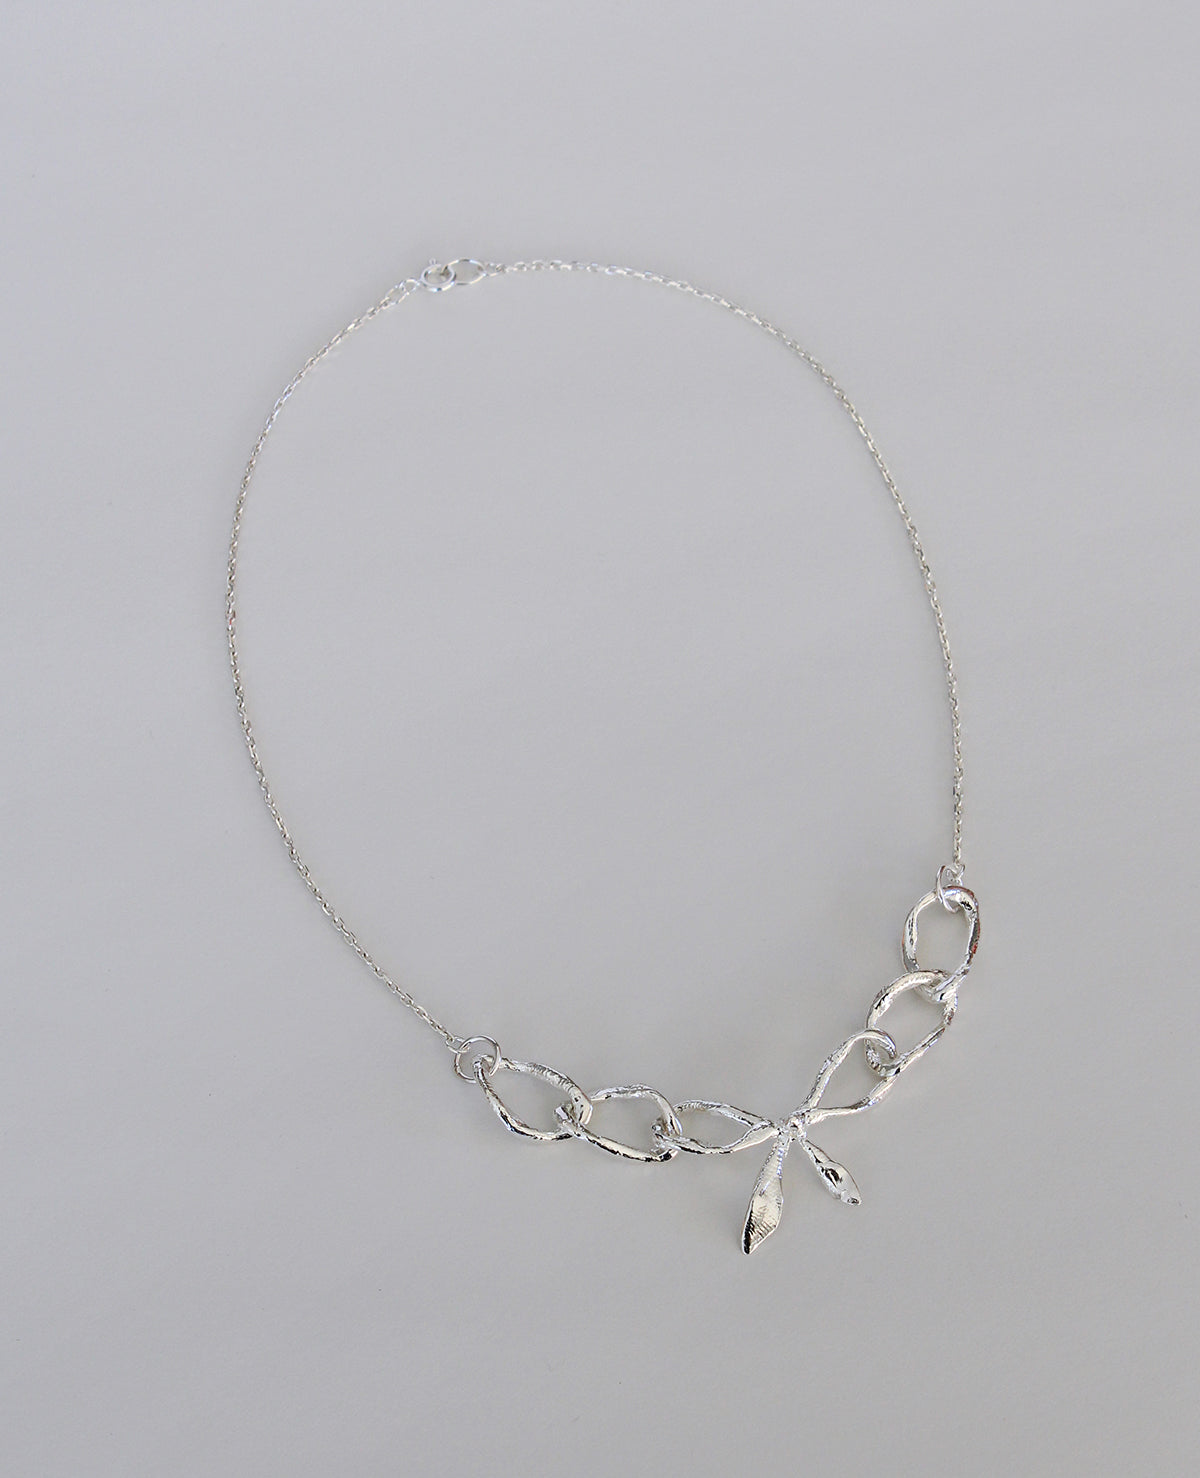 BOW REALIS // silver necklace - ORA-C jewelry - handmade jewelry by Montreal based independent designer Caroline Pham